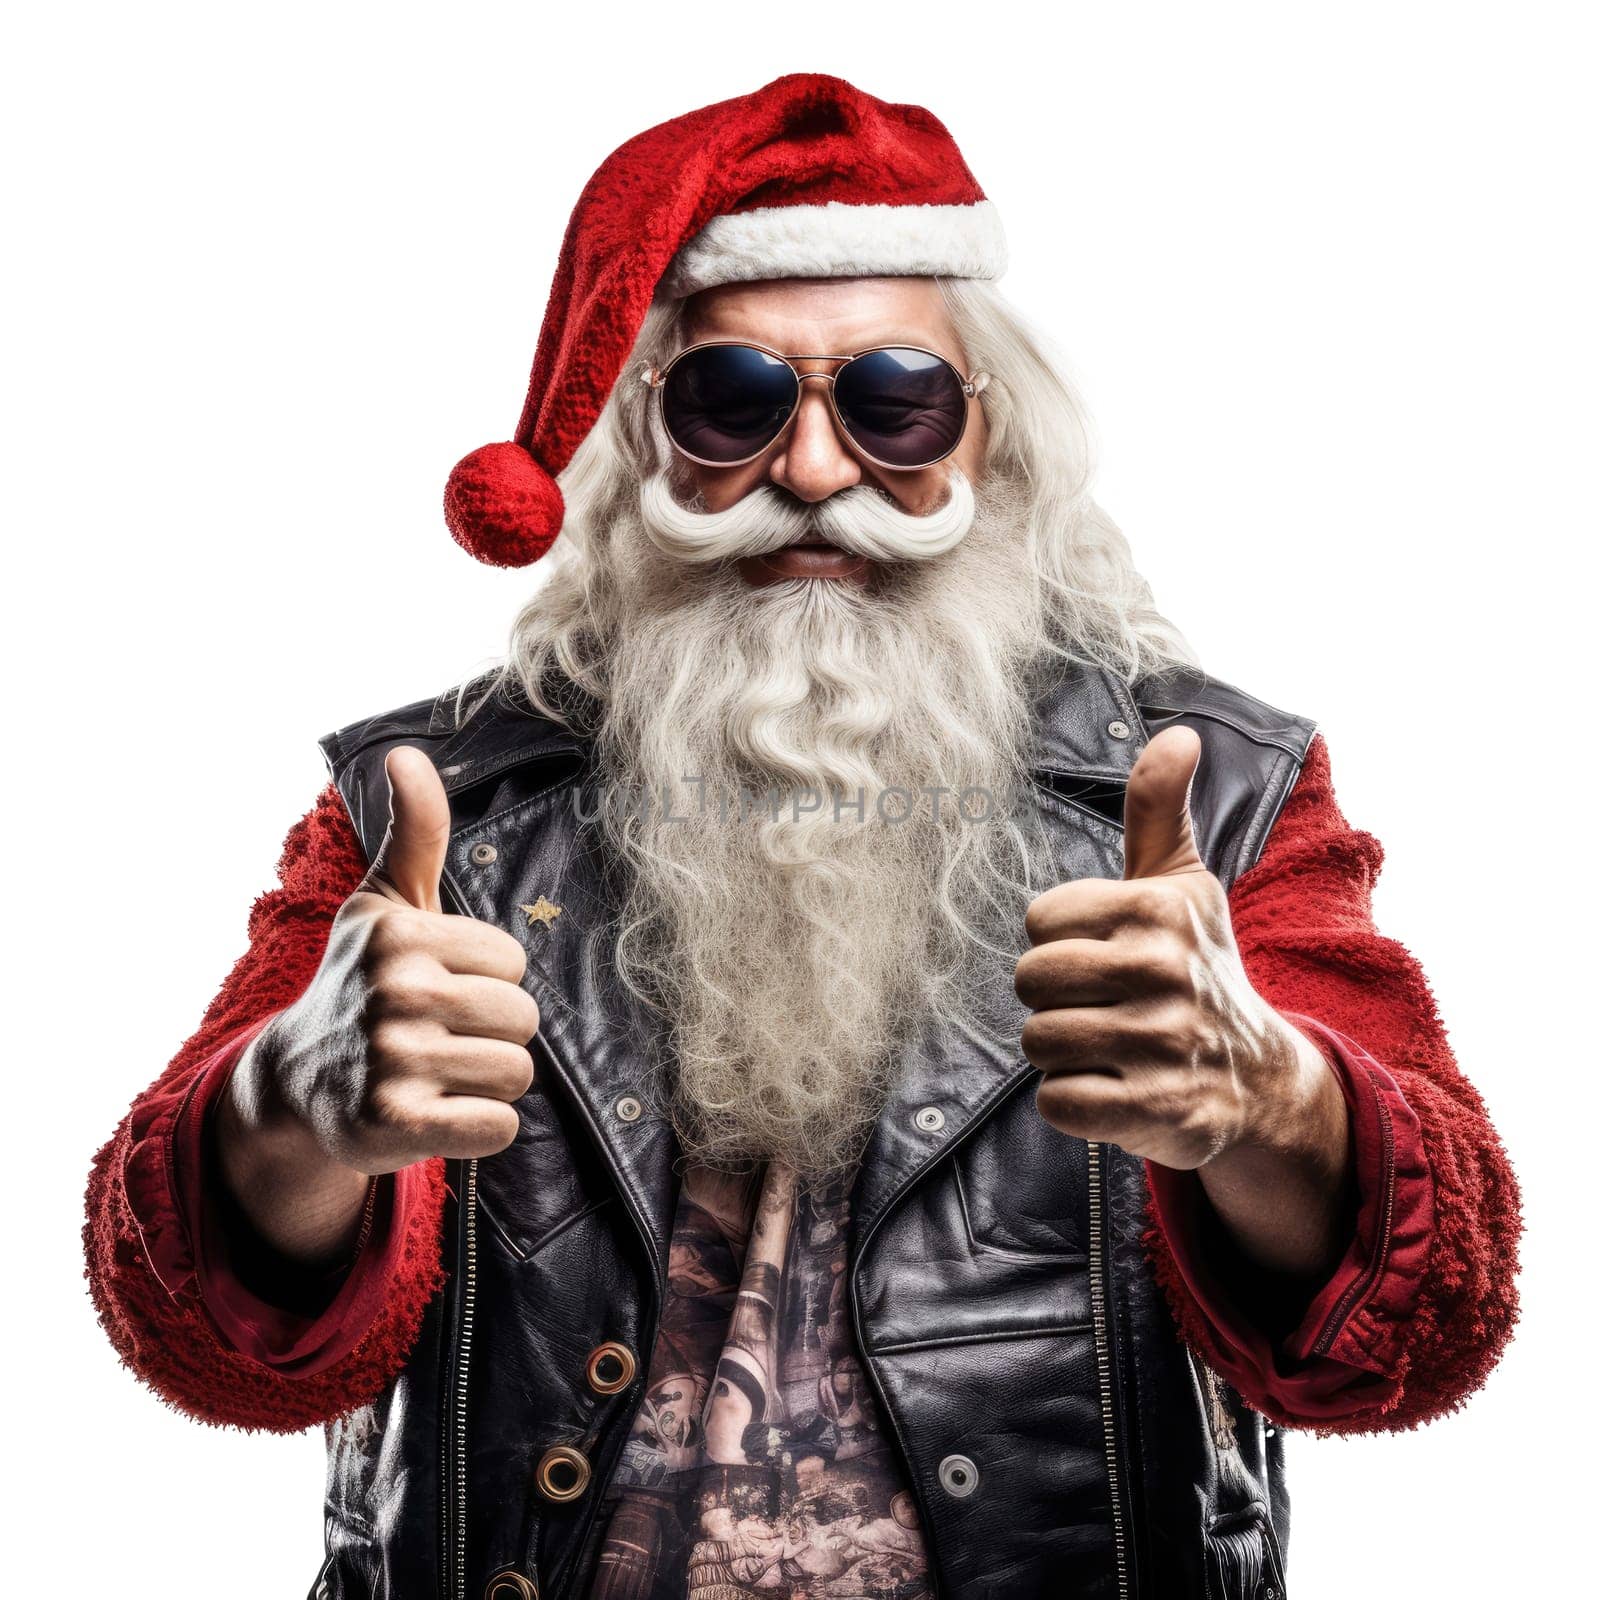 Funny Santa Claus biker. In a leather jacket and sunglasses. Isolated on white by natali_brill